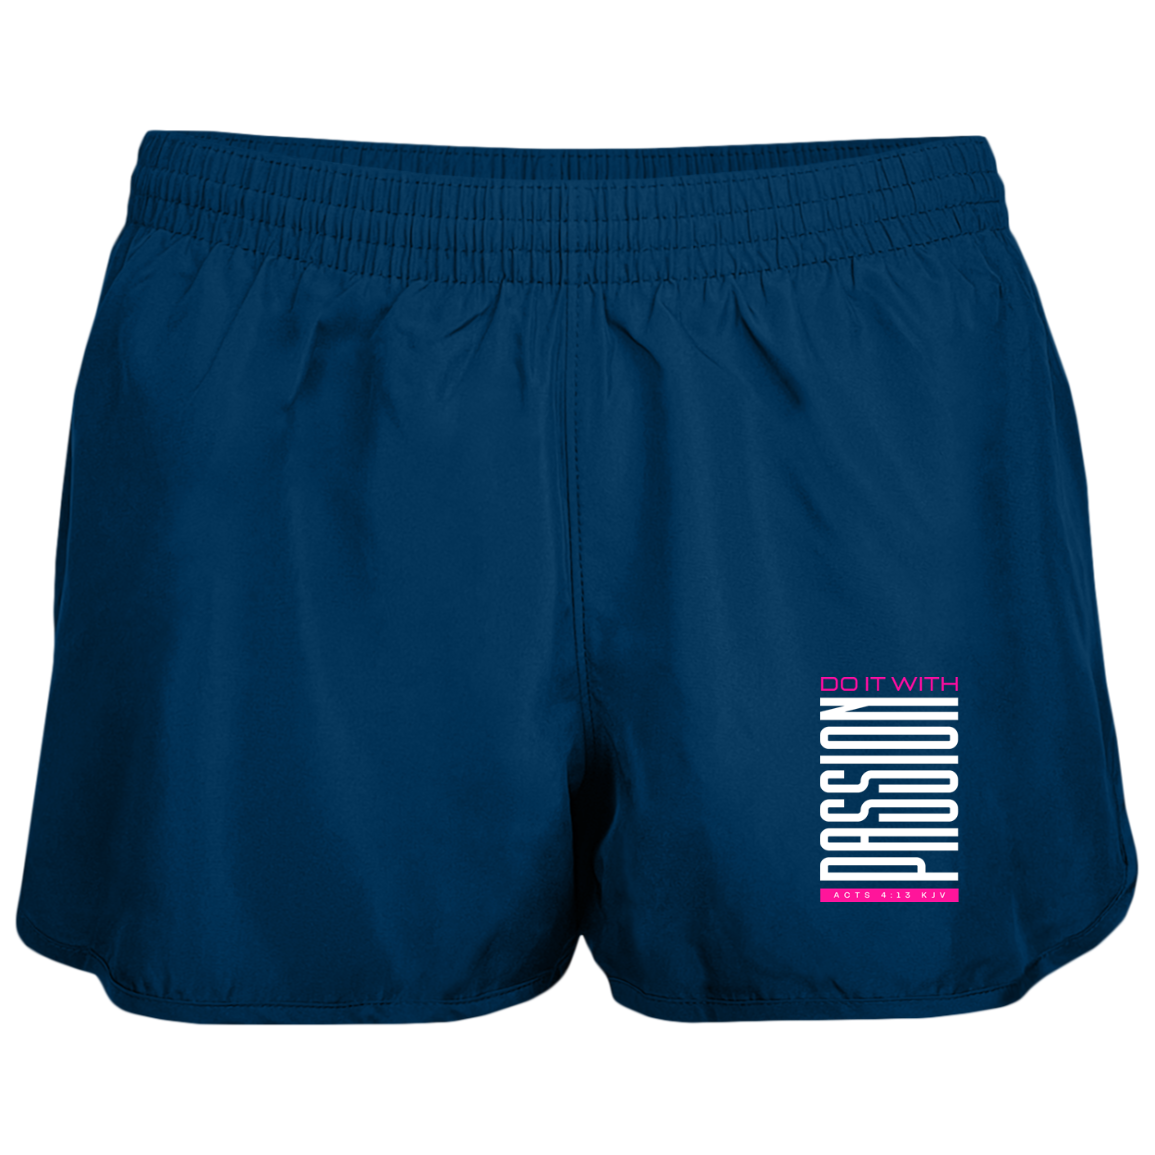 DO IT WITH PASSION RUNNING SHORTS (LADIES)